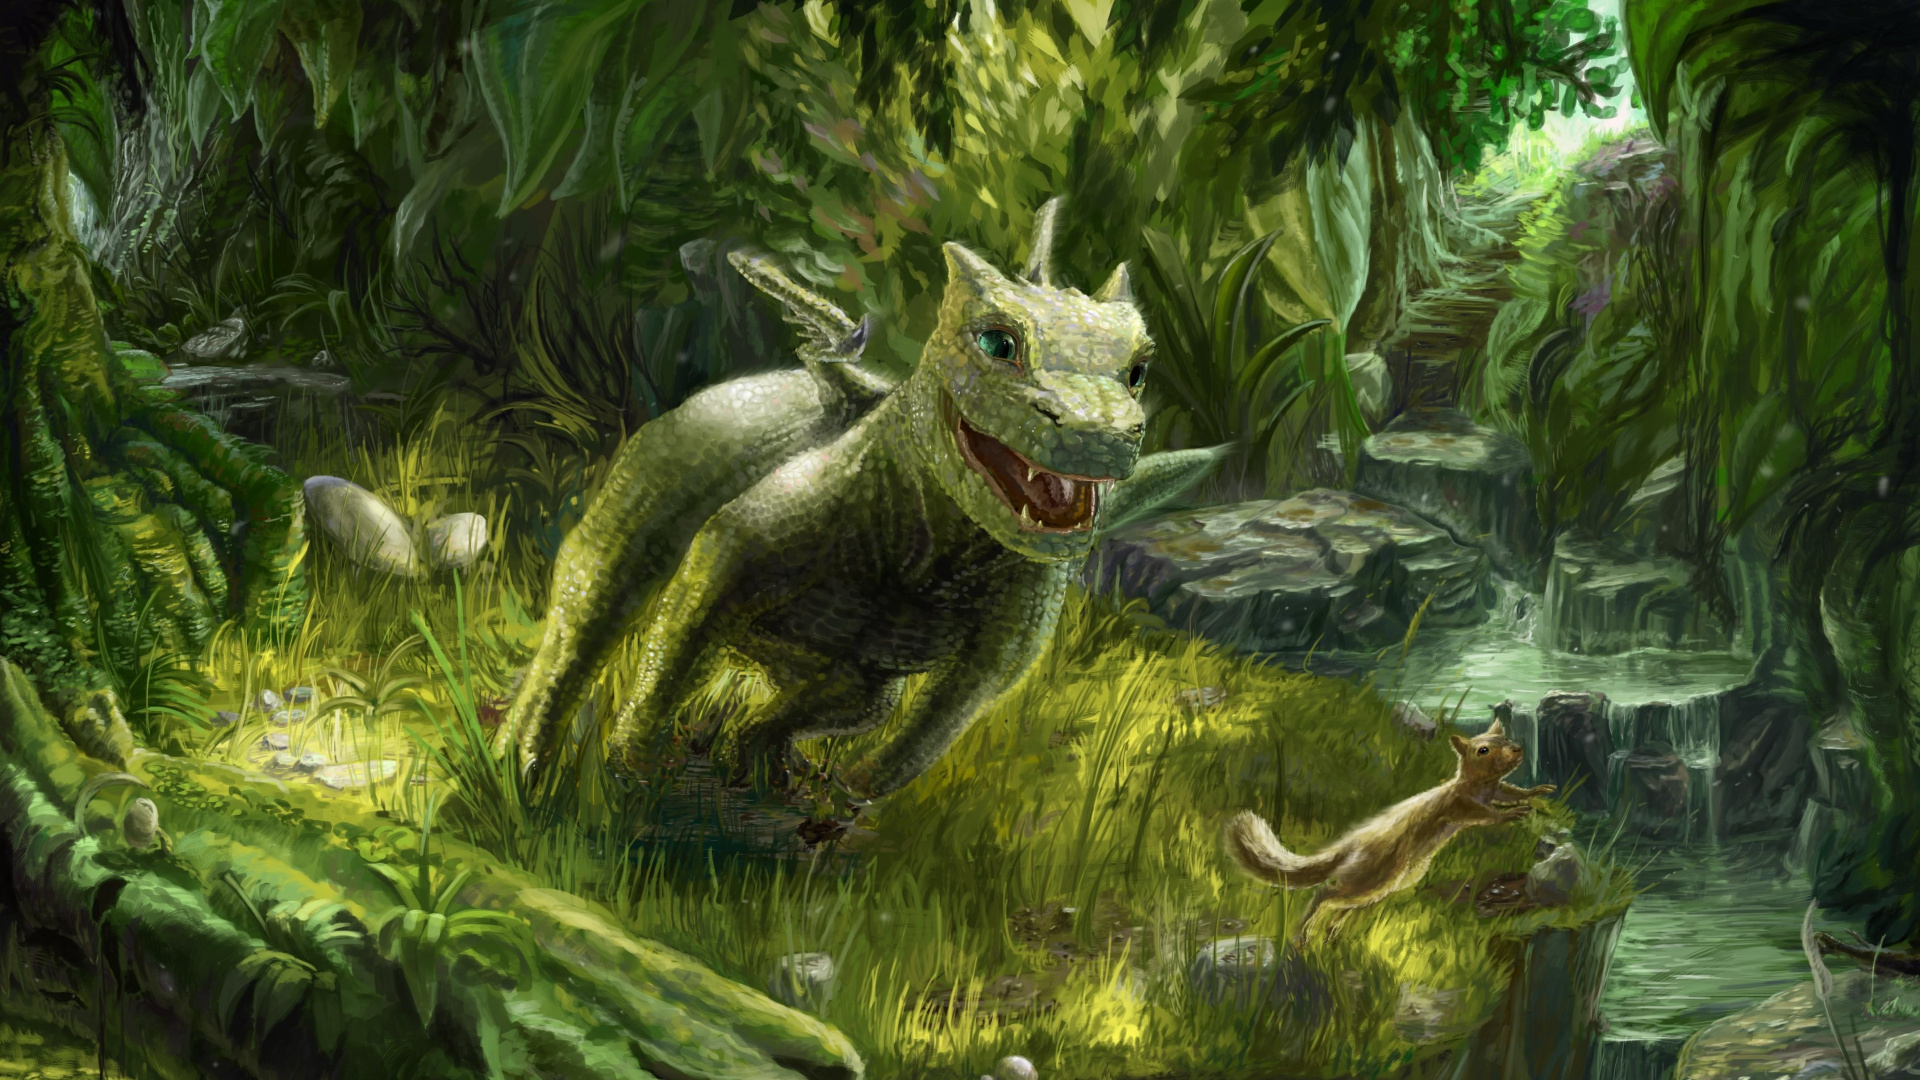 Green and Gray Dragon on Green Grass Painting. Wallpaper in 1920x1080 Resolution